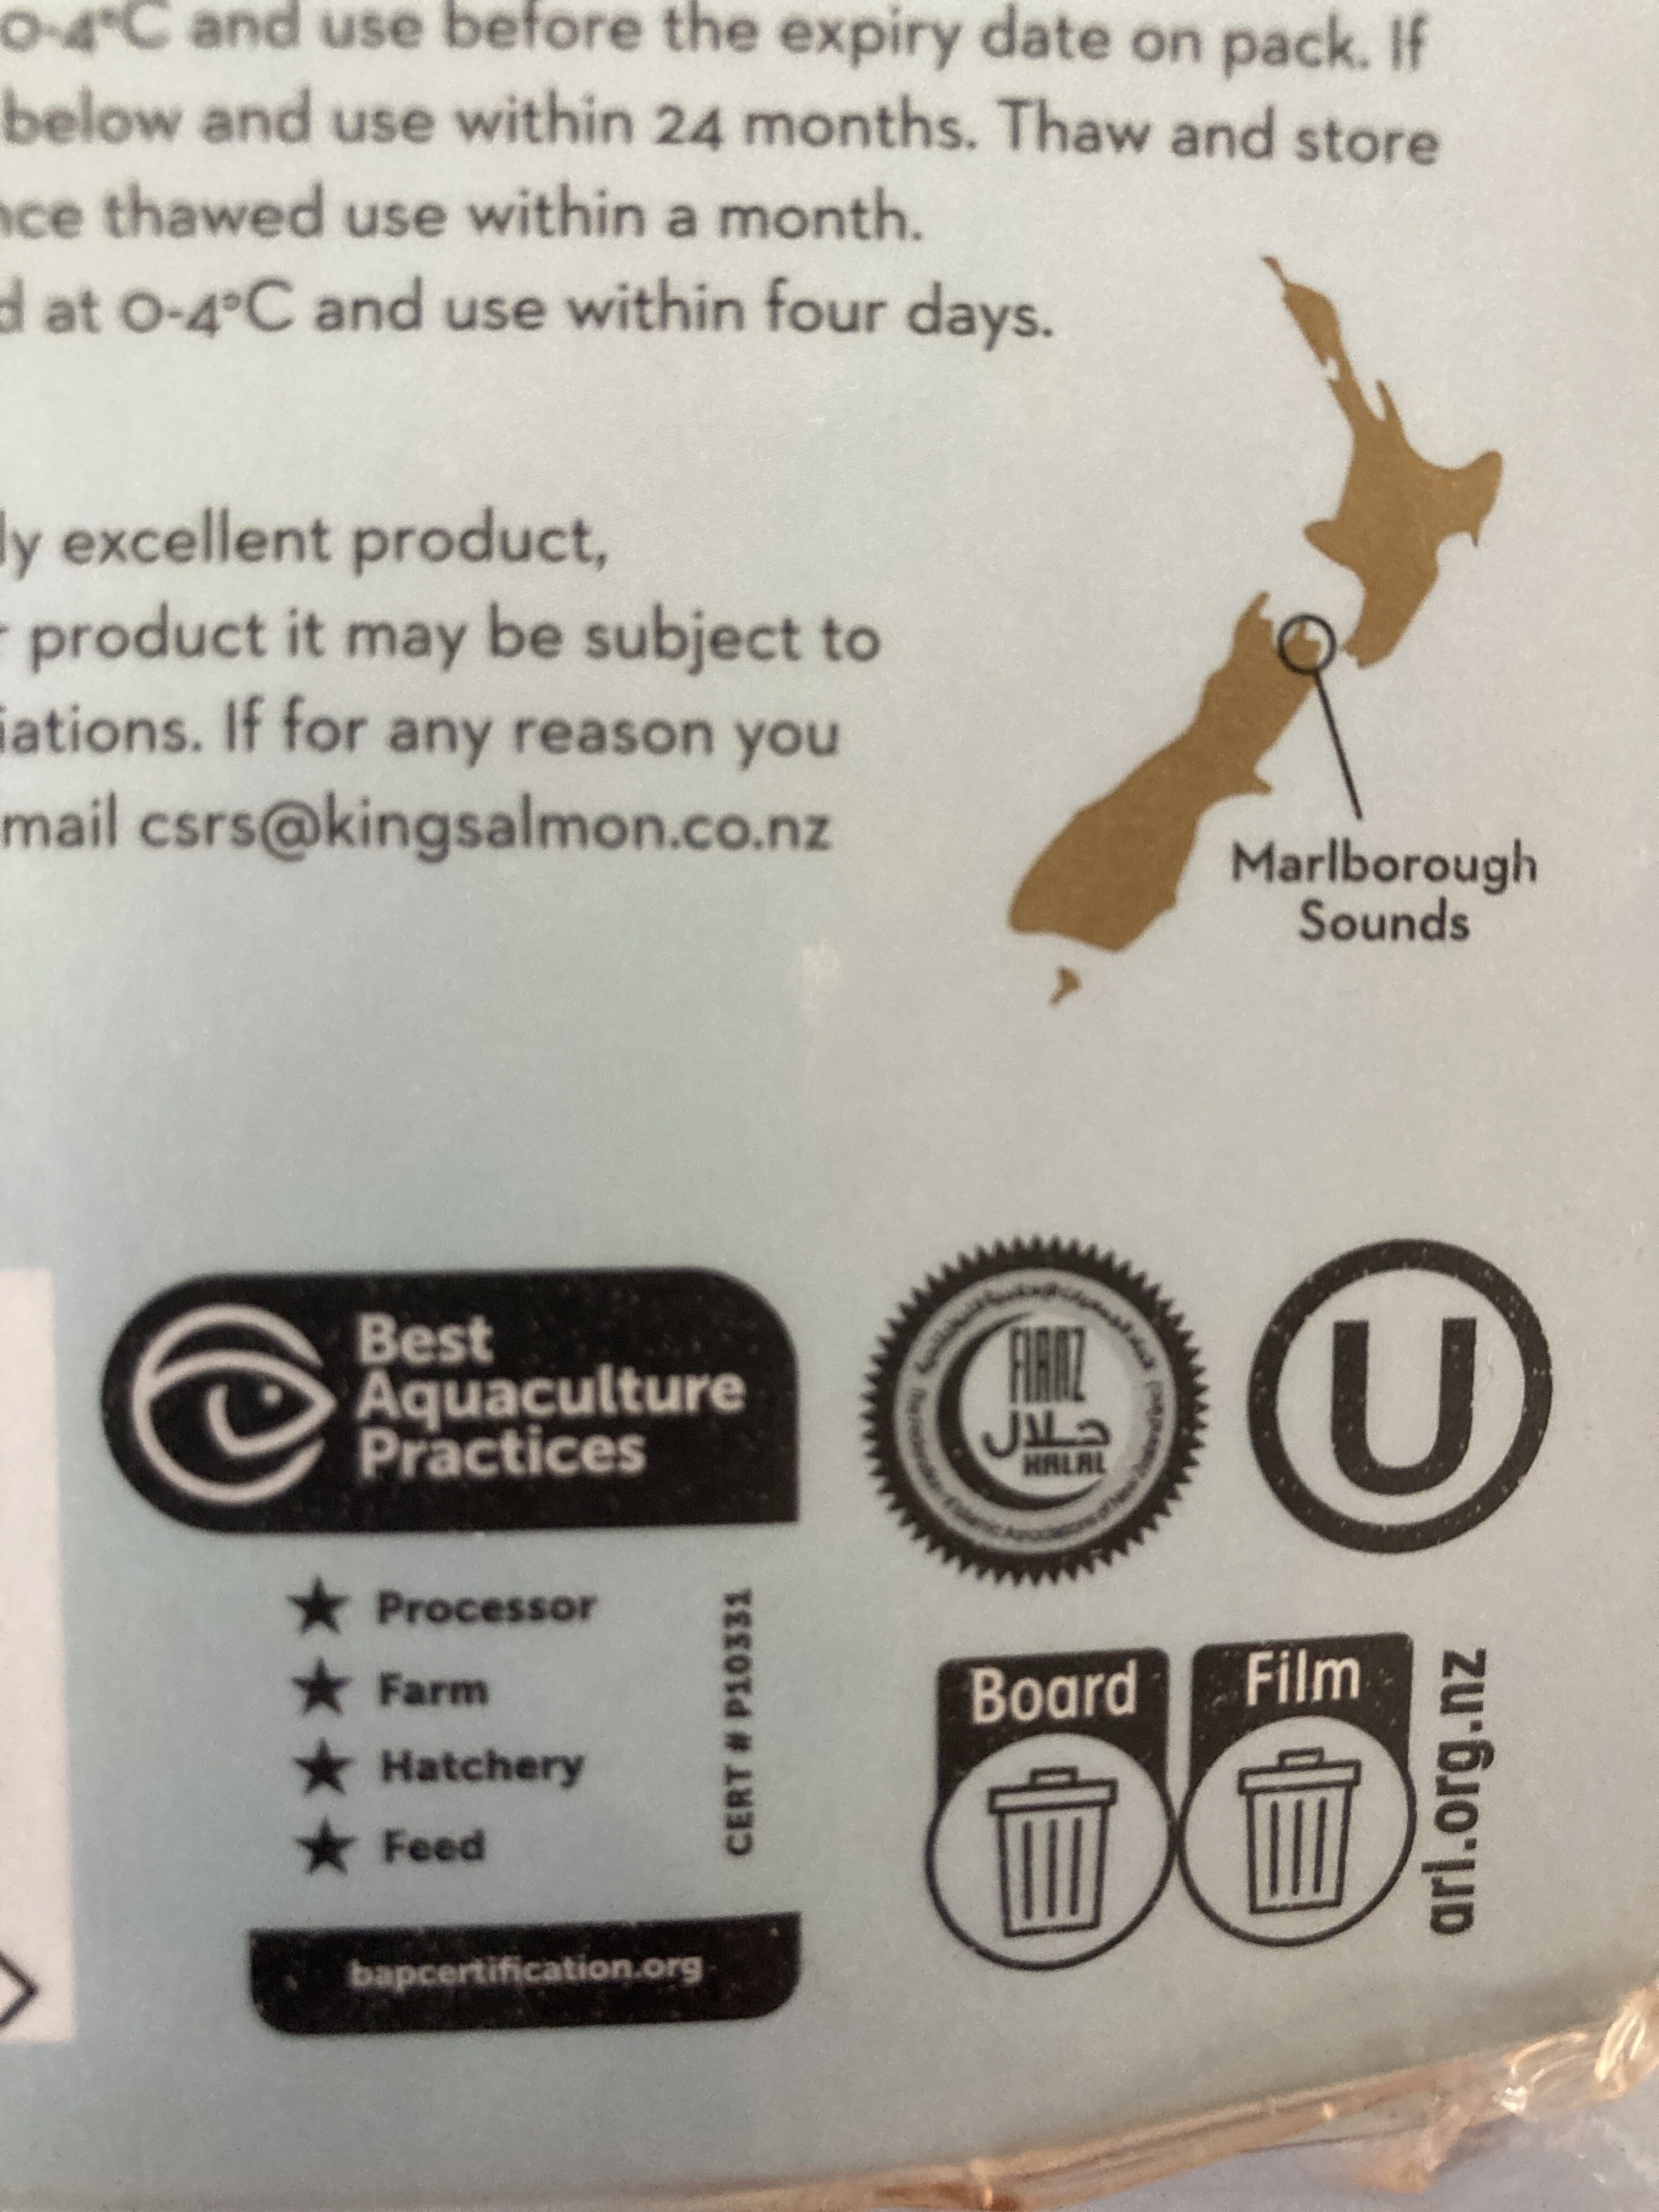 New Zealand King Salmon - Recycling instructions and/or packaging information